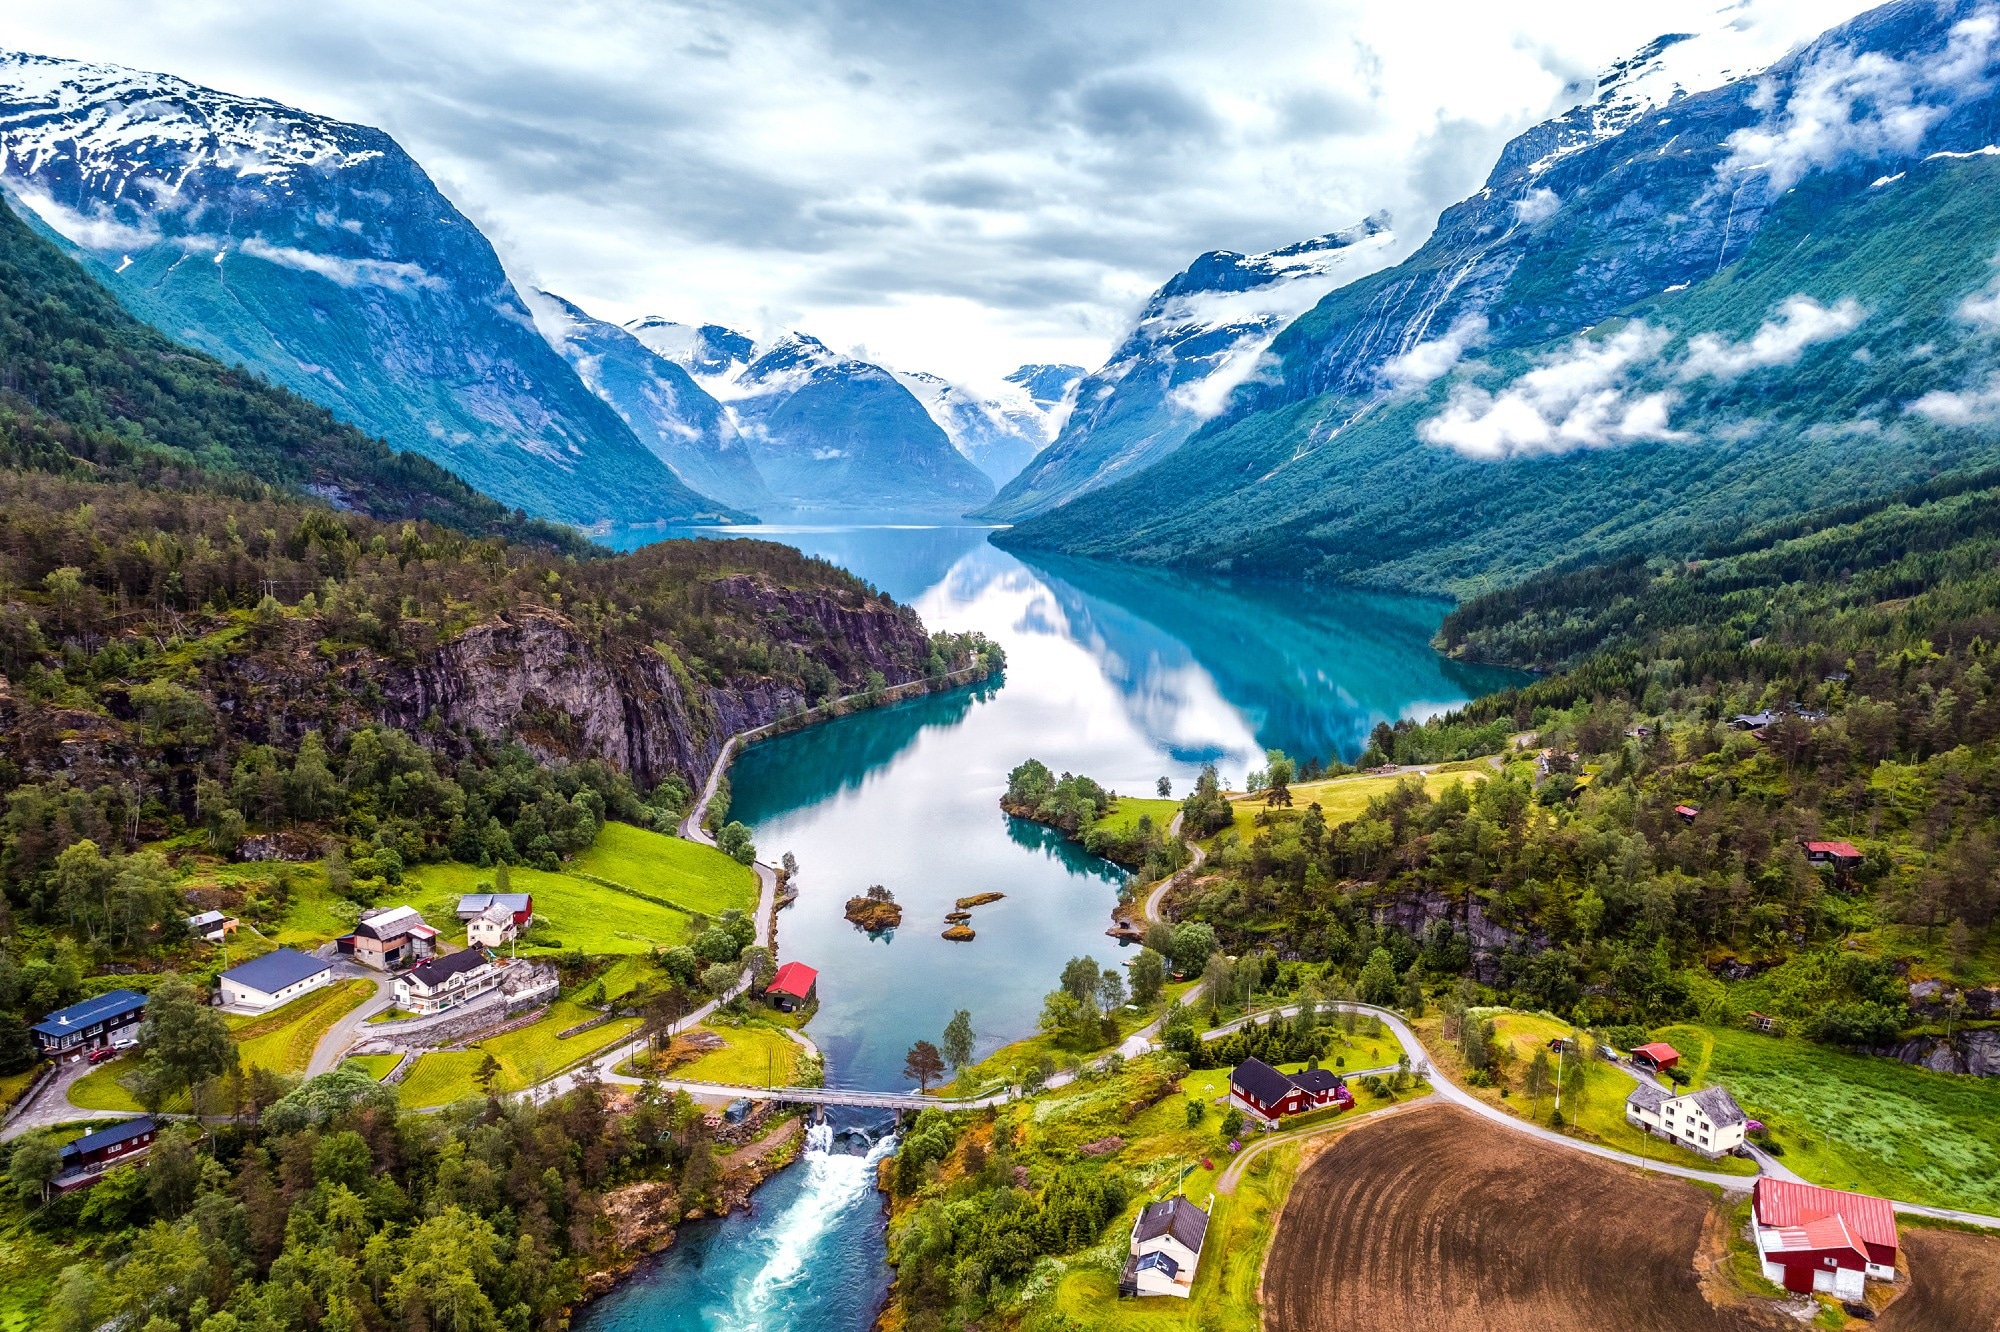 Study: The genetic history of Scandinavia from the Roman Iron Age to the present. Image Credit: Andrei Armiagov/Shutterstock